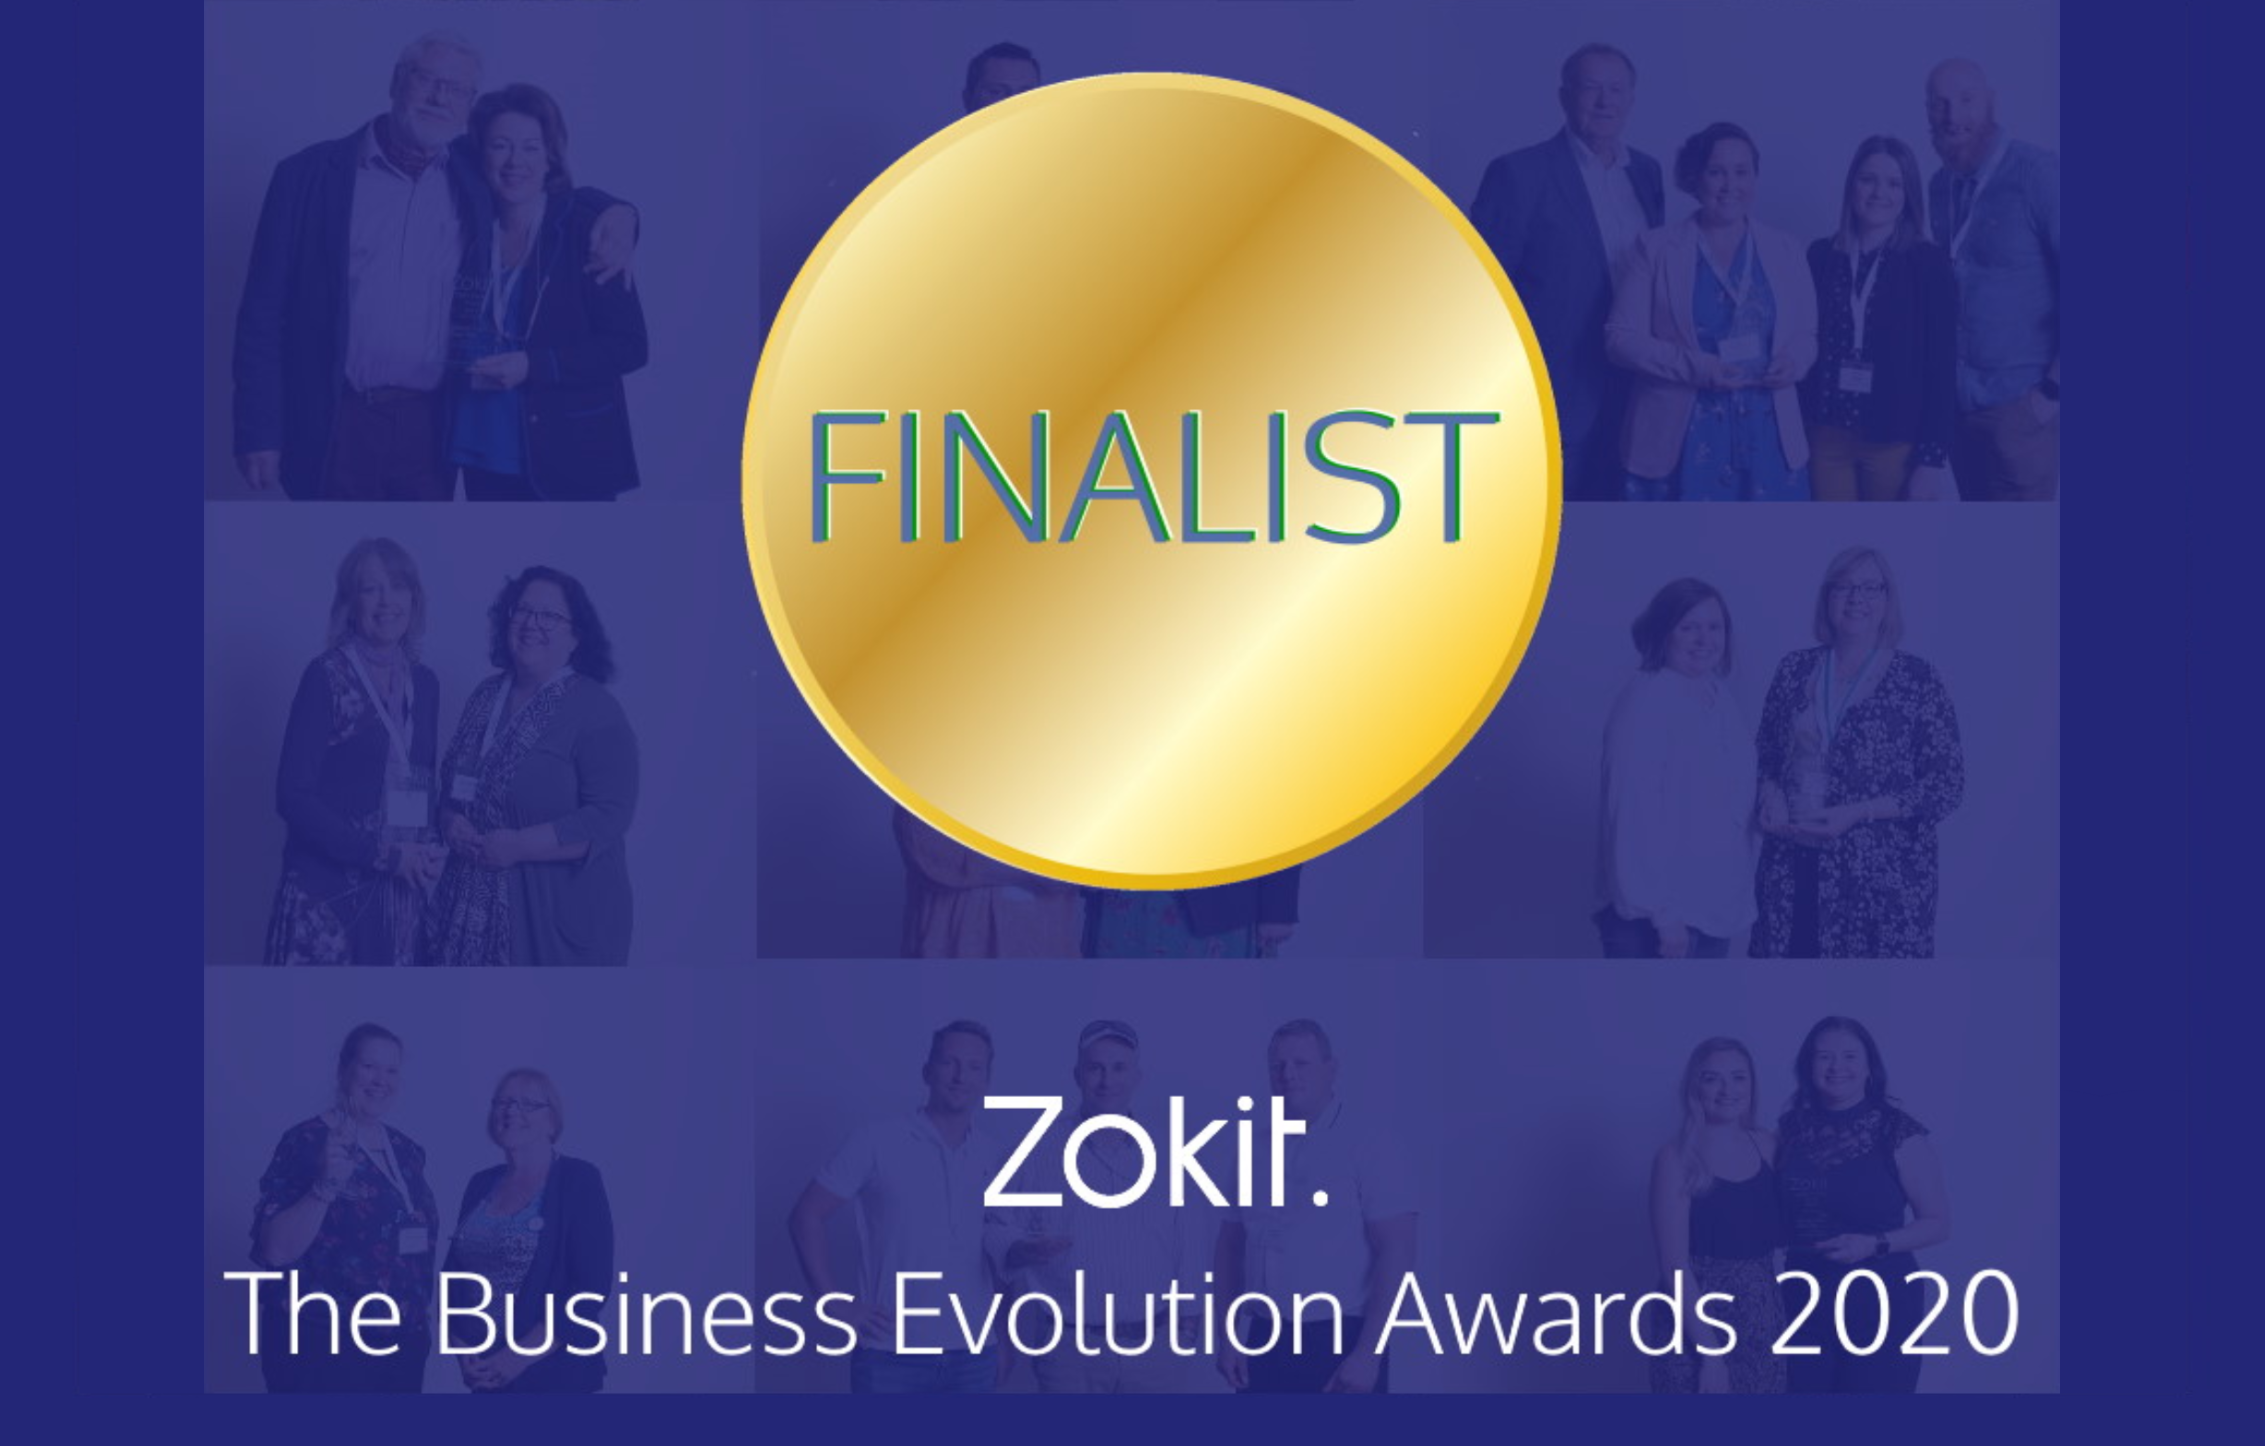 Mustard announced as a finalist in the Business Evolution Awards 2020 by Zokit